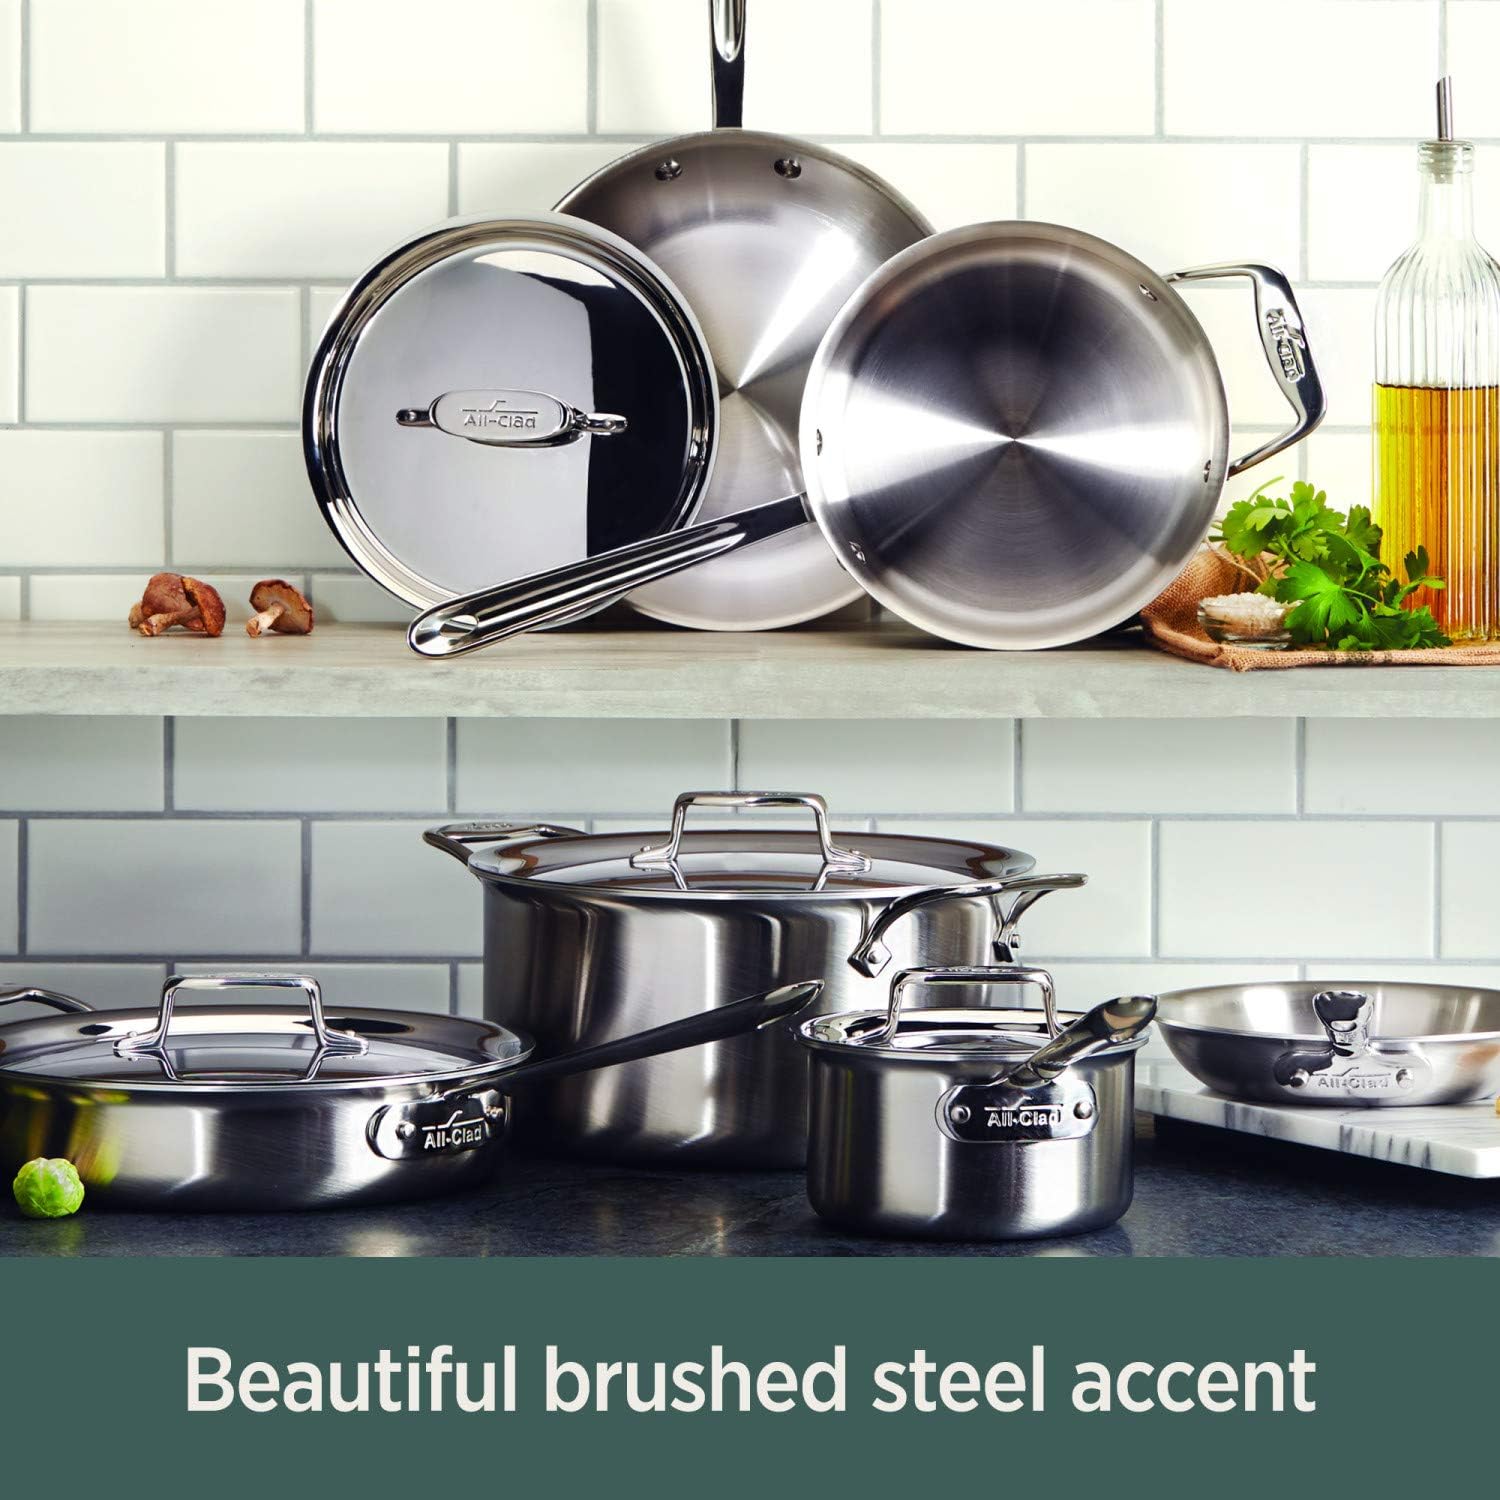 All-Clad 3-Ply Saucepan, Stainless Steel - 3 qt